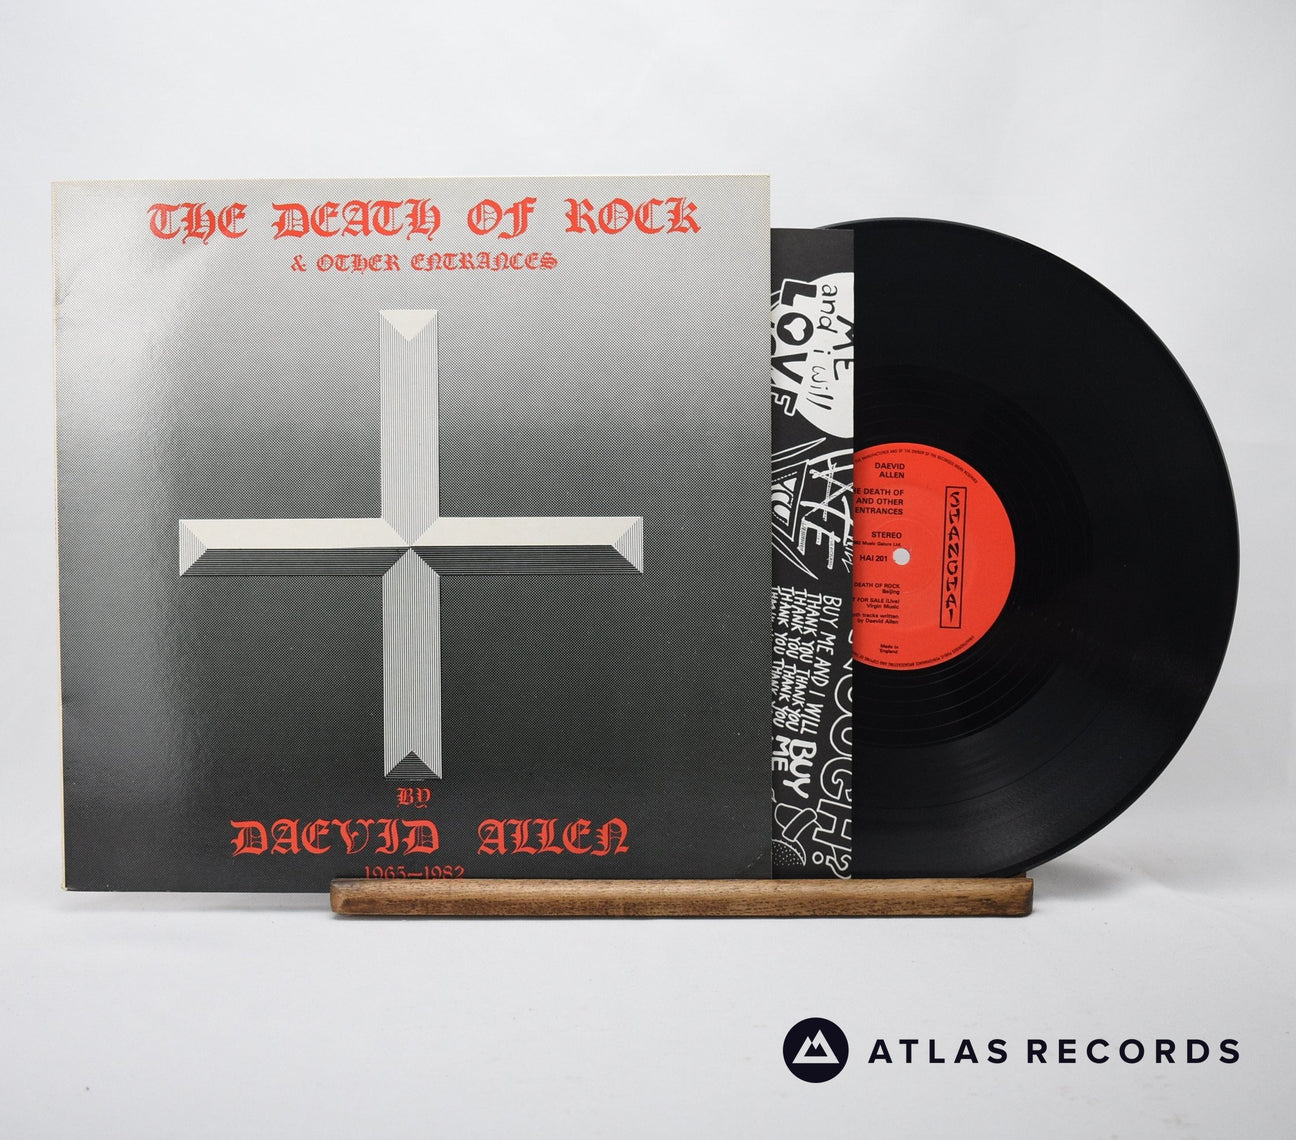 Daevid Allen The Death Of Rock & Other Entrances 12" Vinyl Record - Front Cover & Record